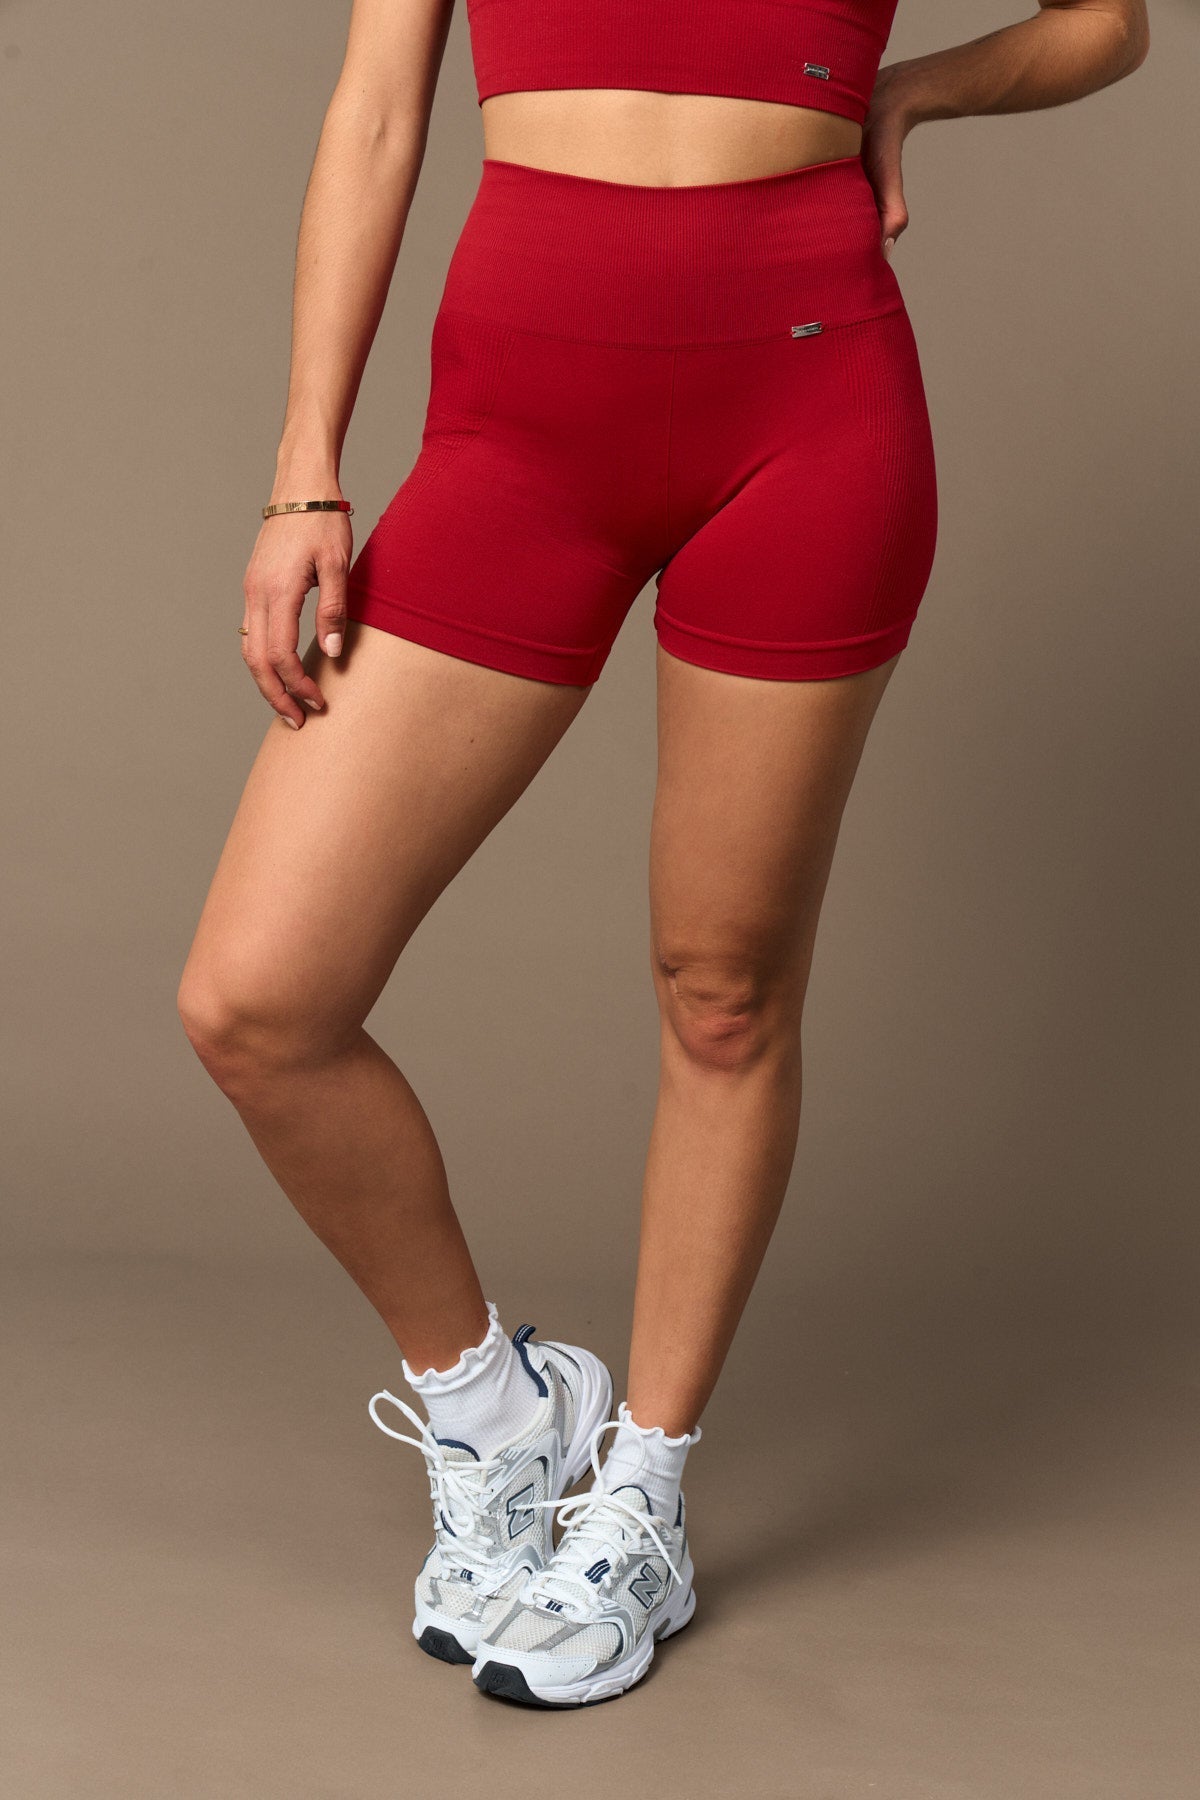 Bliss Short Push-Up en Rojo-Shorts-Tienda Ropa Leggings Yoga Sostenibles Reciclados Mujer On-line Barcelona Believe Athletics Sustainable Recycled Yoga Clothes